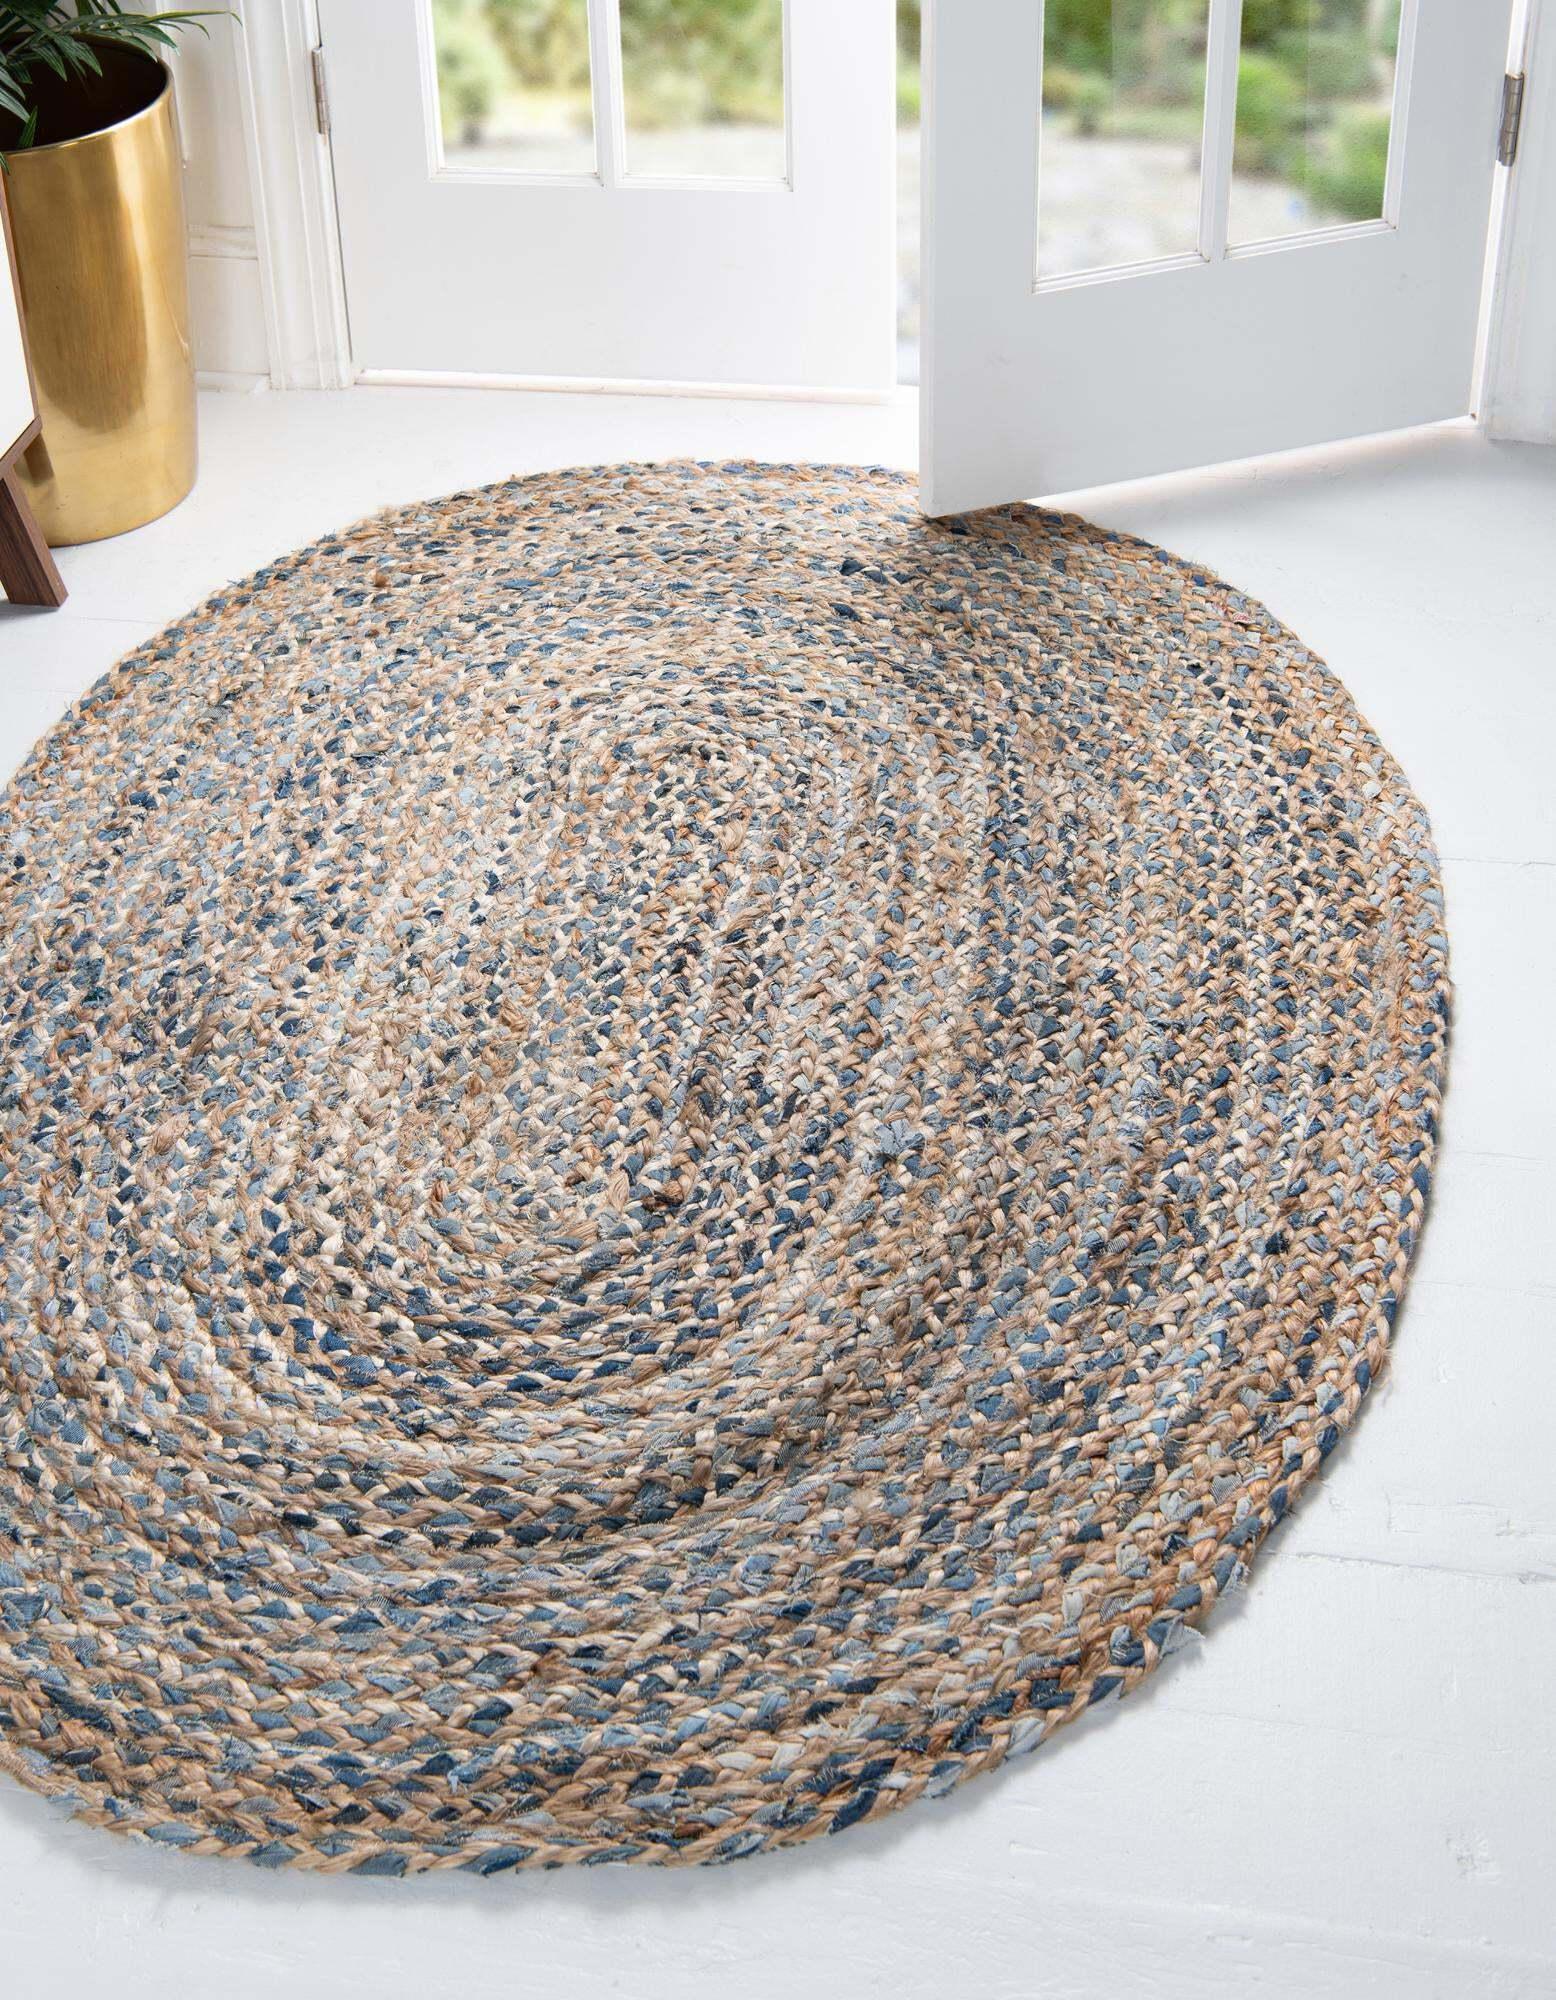 Unique Loom Indoor Rugs - Braided Chindi Abstract Oval 8x10 Oval Rug Blue & Tan